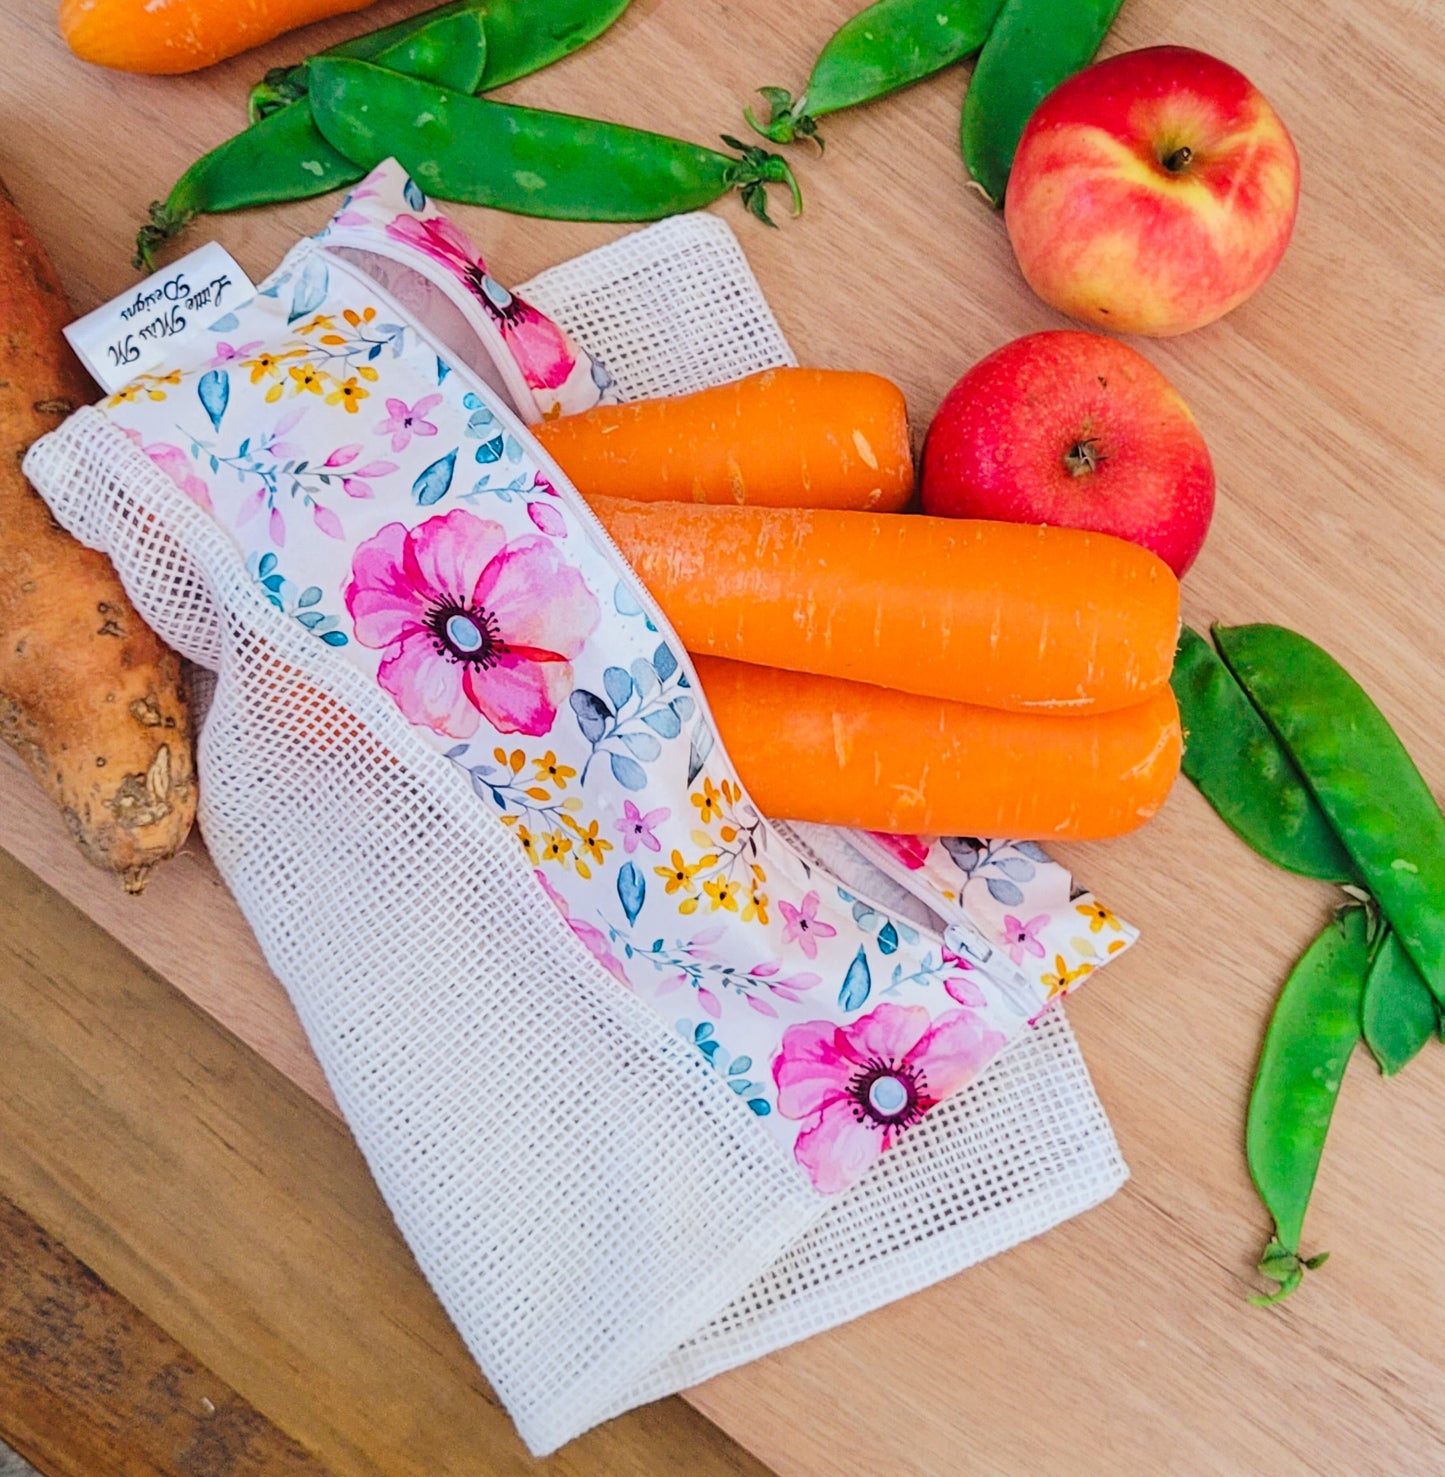 Summertime Produce Bags